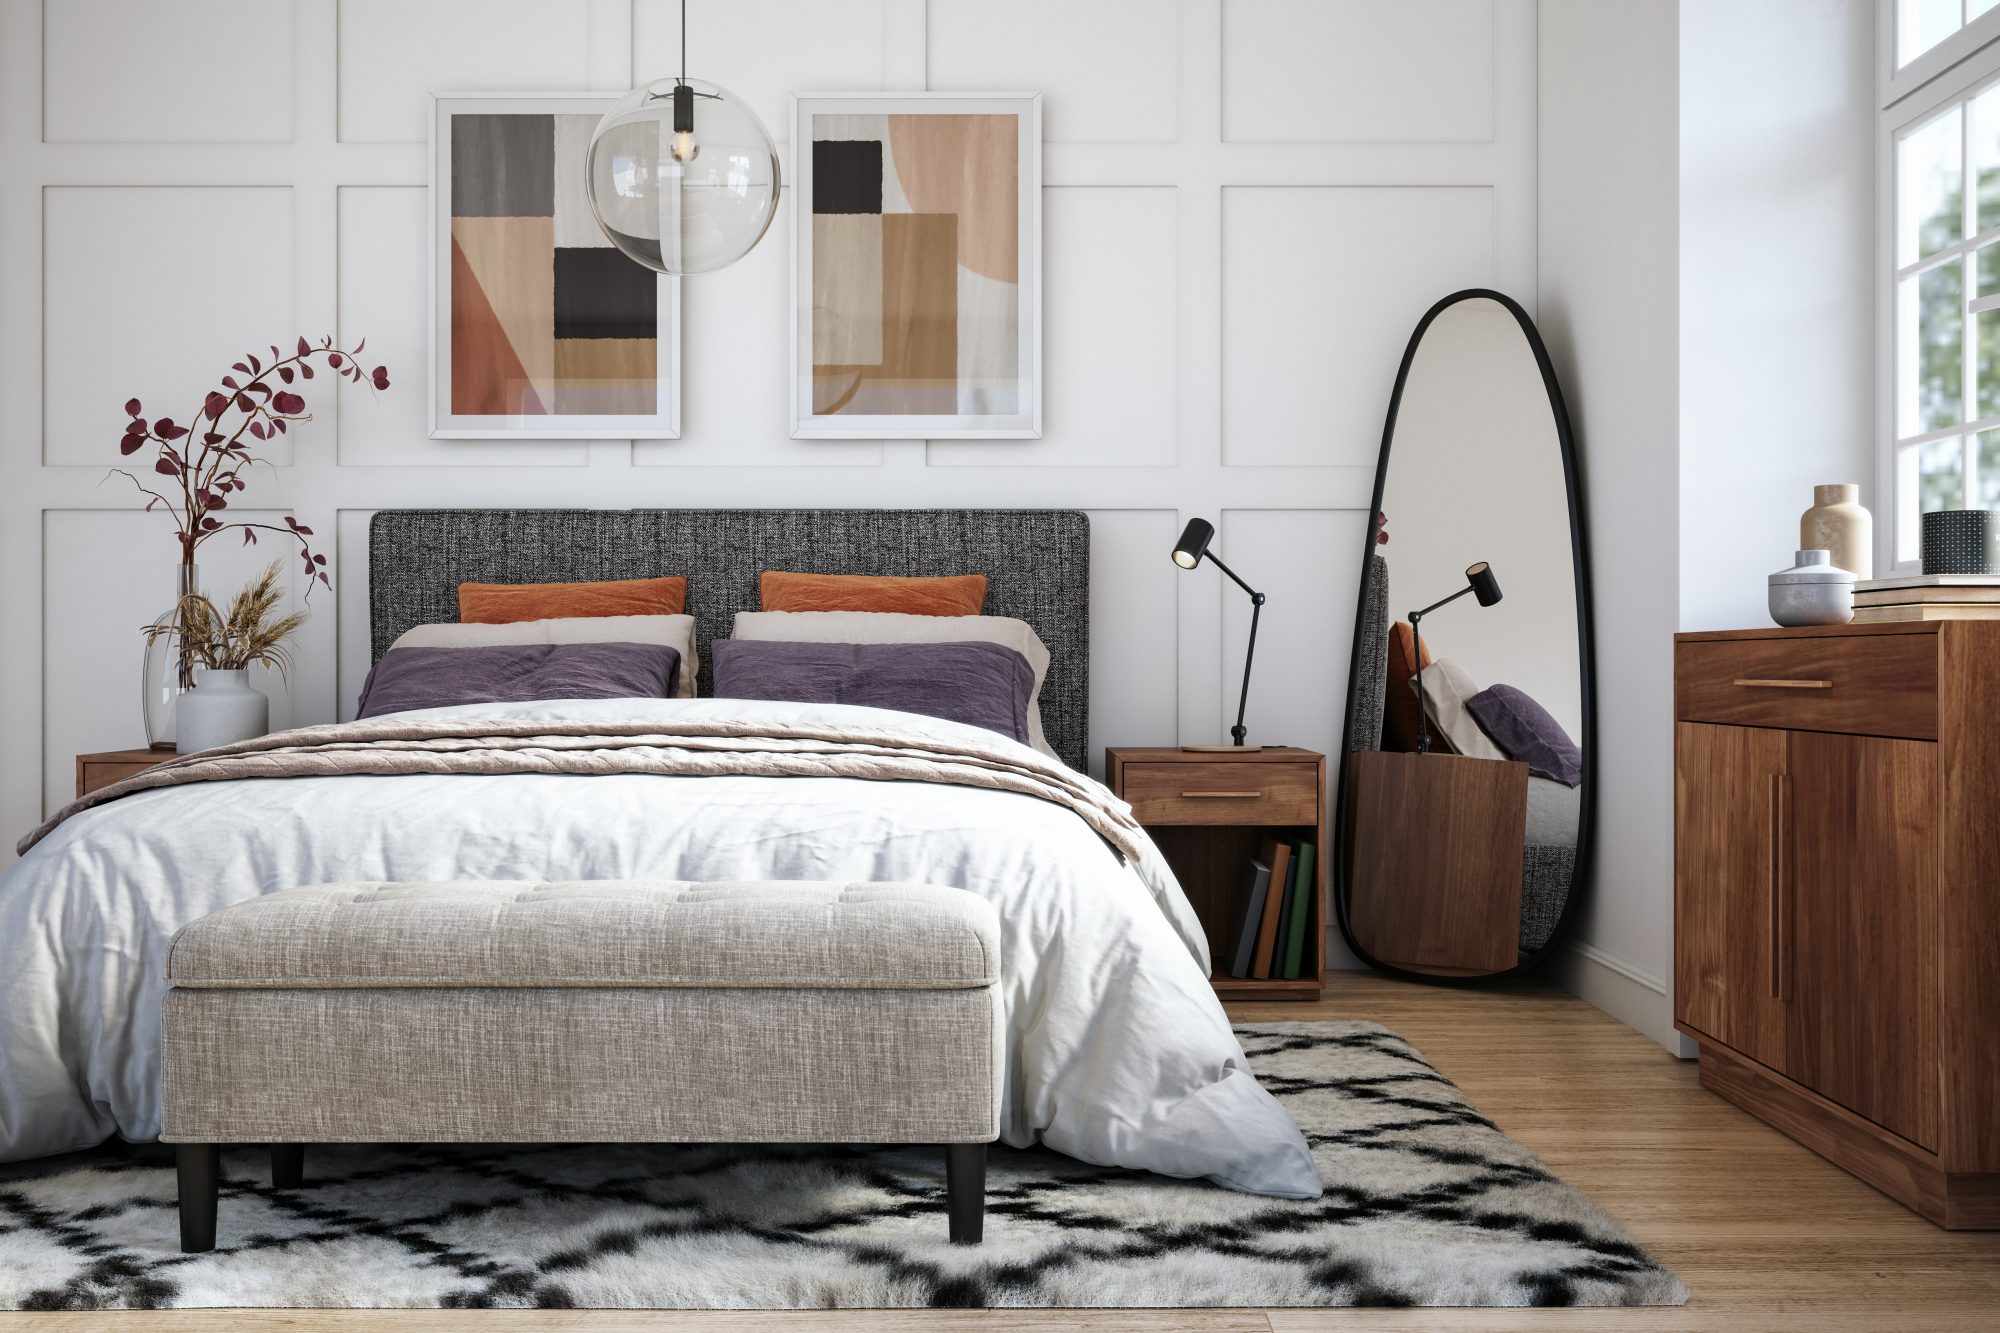 Picking the Right Rug Size for a King Bed